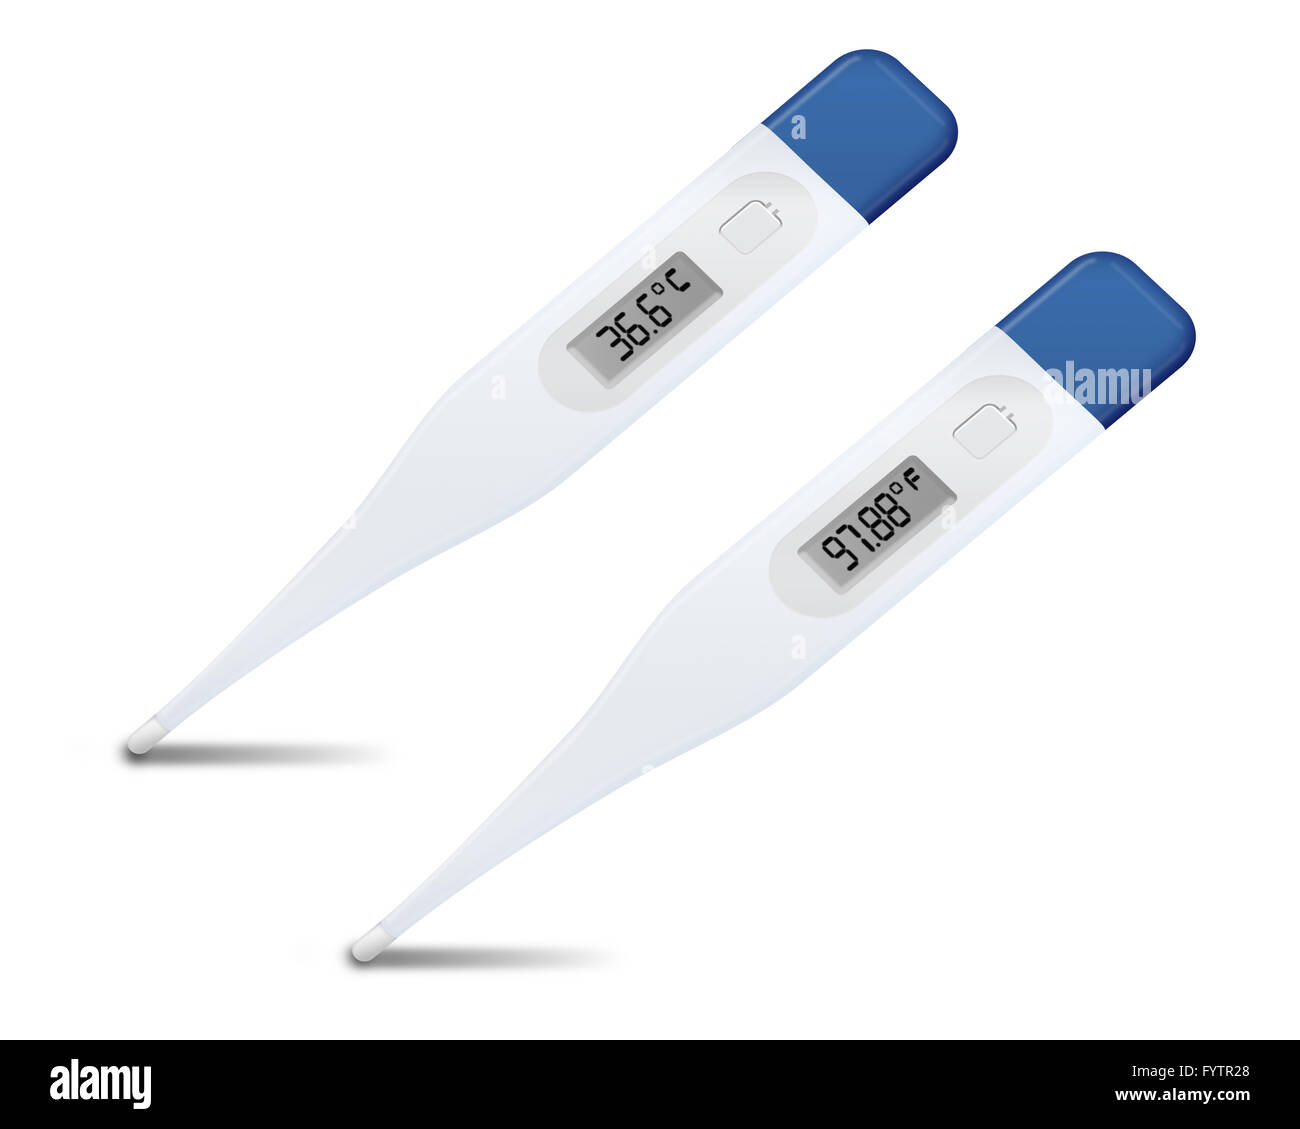 https://c8.alamy.com/comp/FYTR28/set-of-medical-thermometers-with-shadows-isolated-on-white-background-FYTR28.jpg